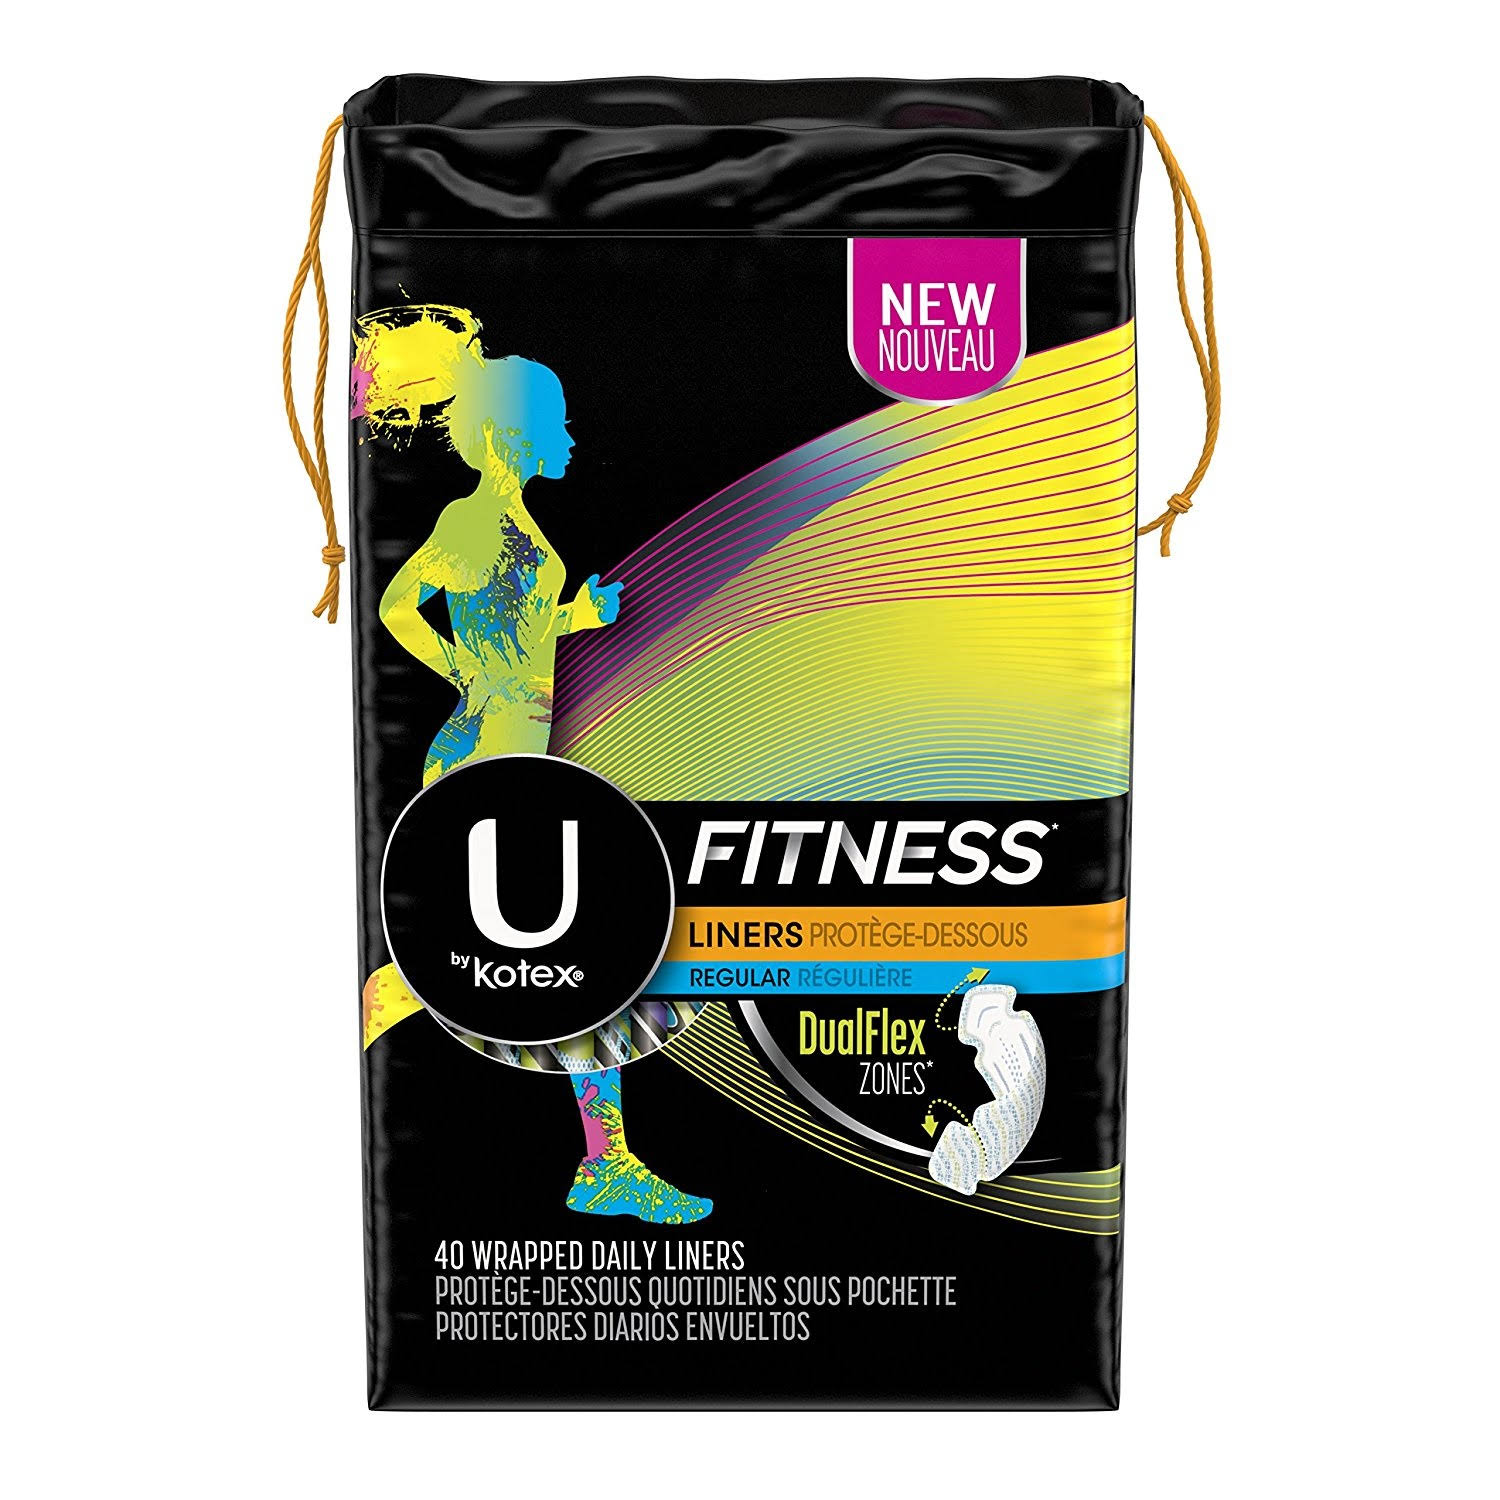 U by Kotex Fitness Regular Wrapped Daily Liners - 40pk